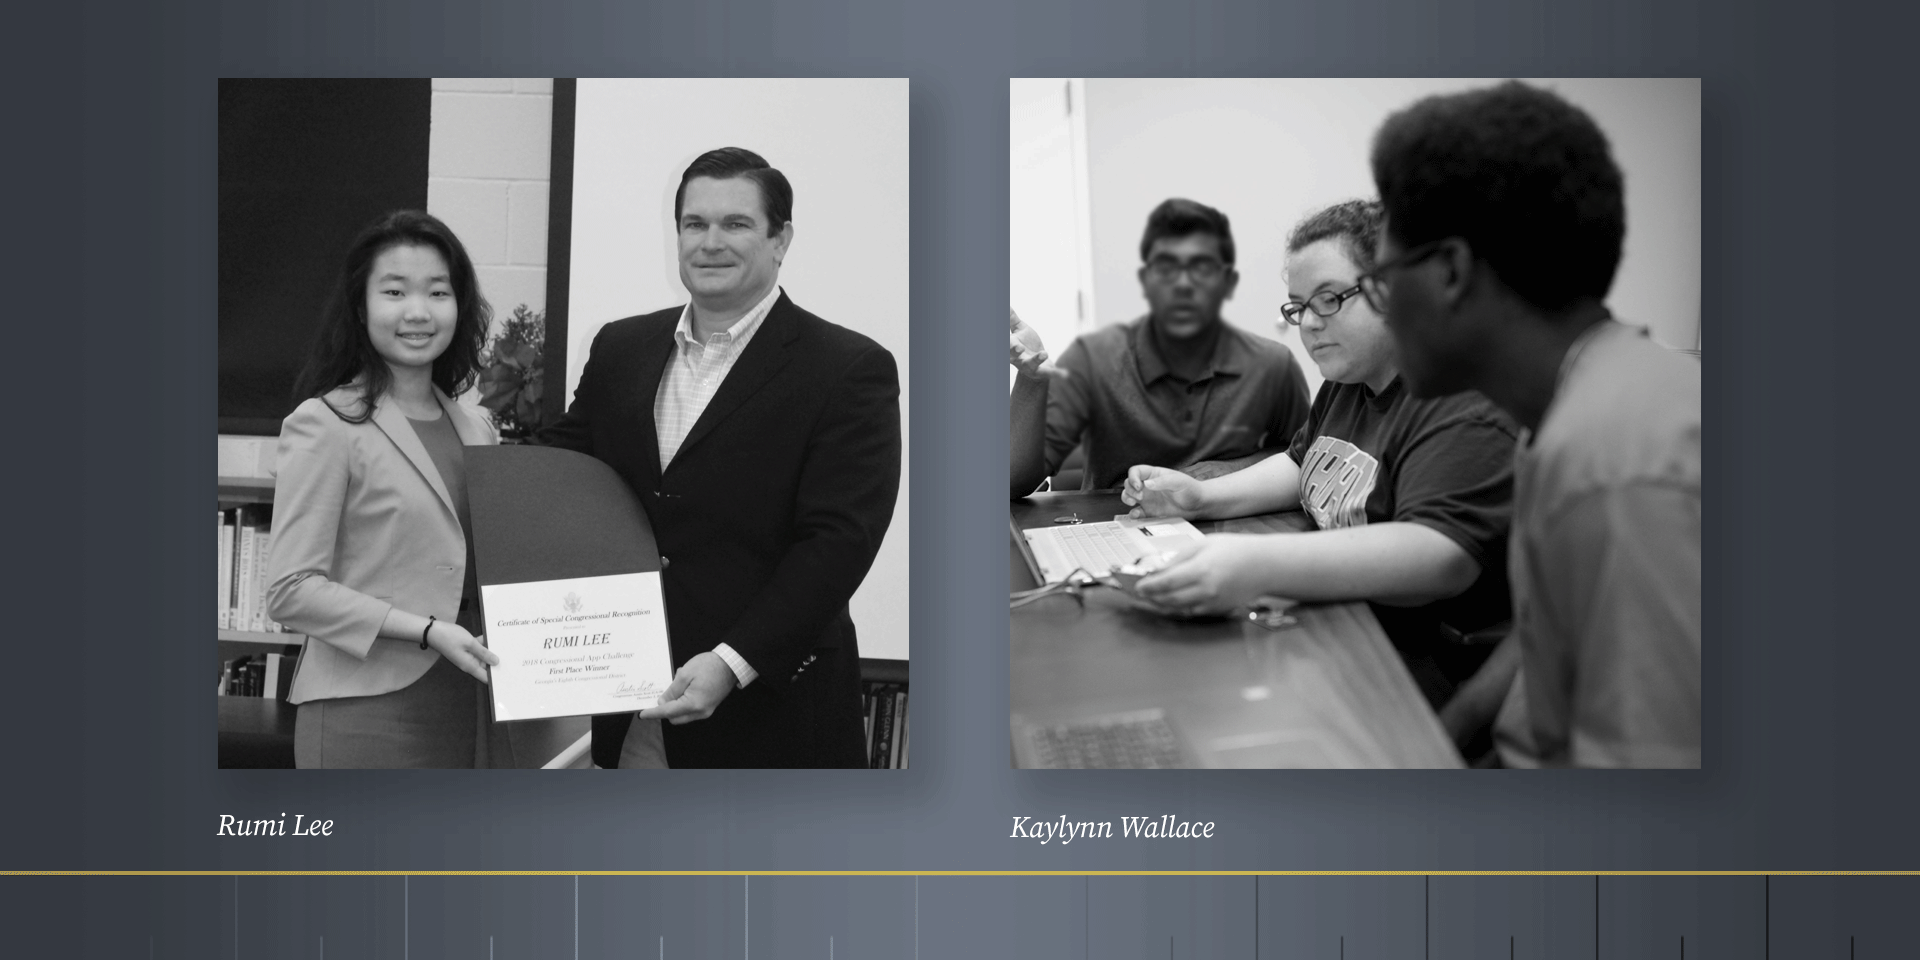 Two black and white photos. Photo on left shows woman receiving award. Photo on right shows young female student at laptop with male students looking on.